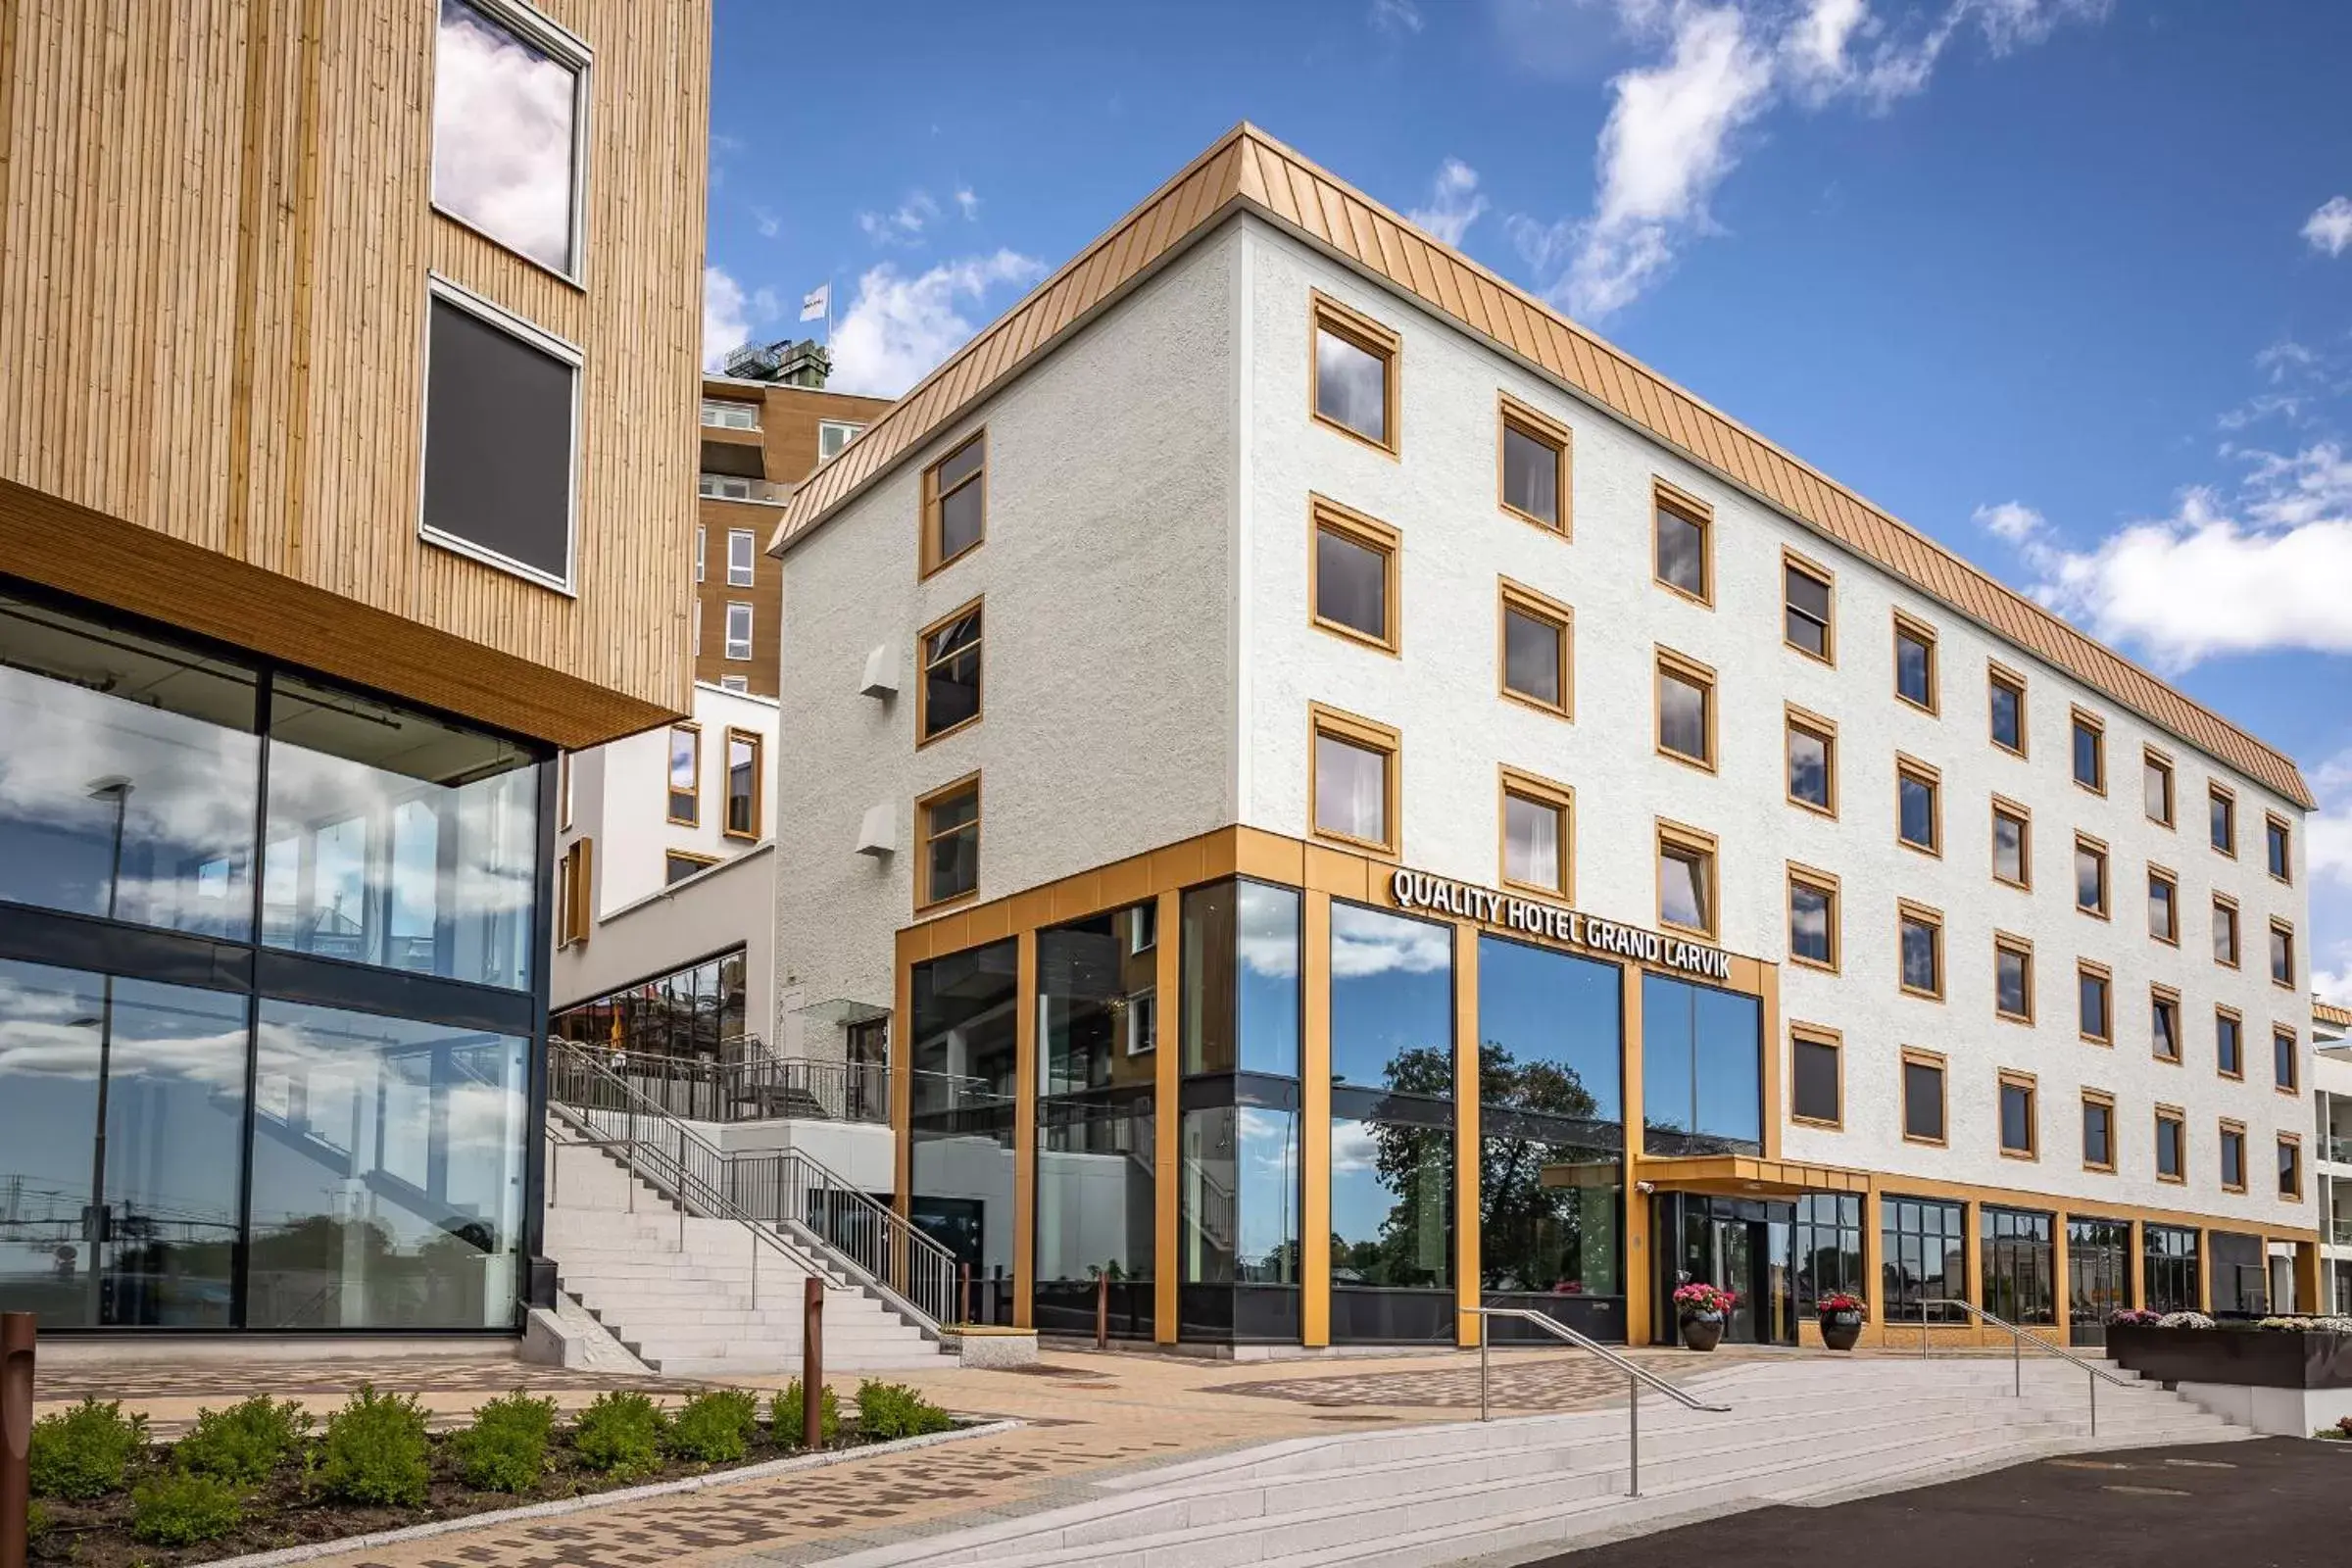 Property Building in Quality Hotel Grand Larvik